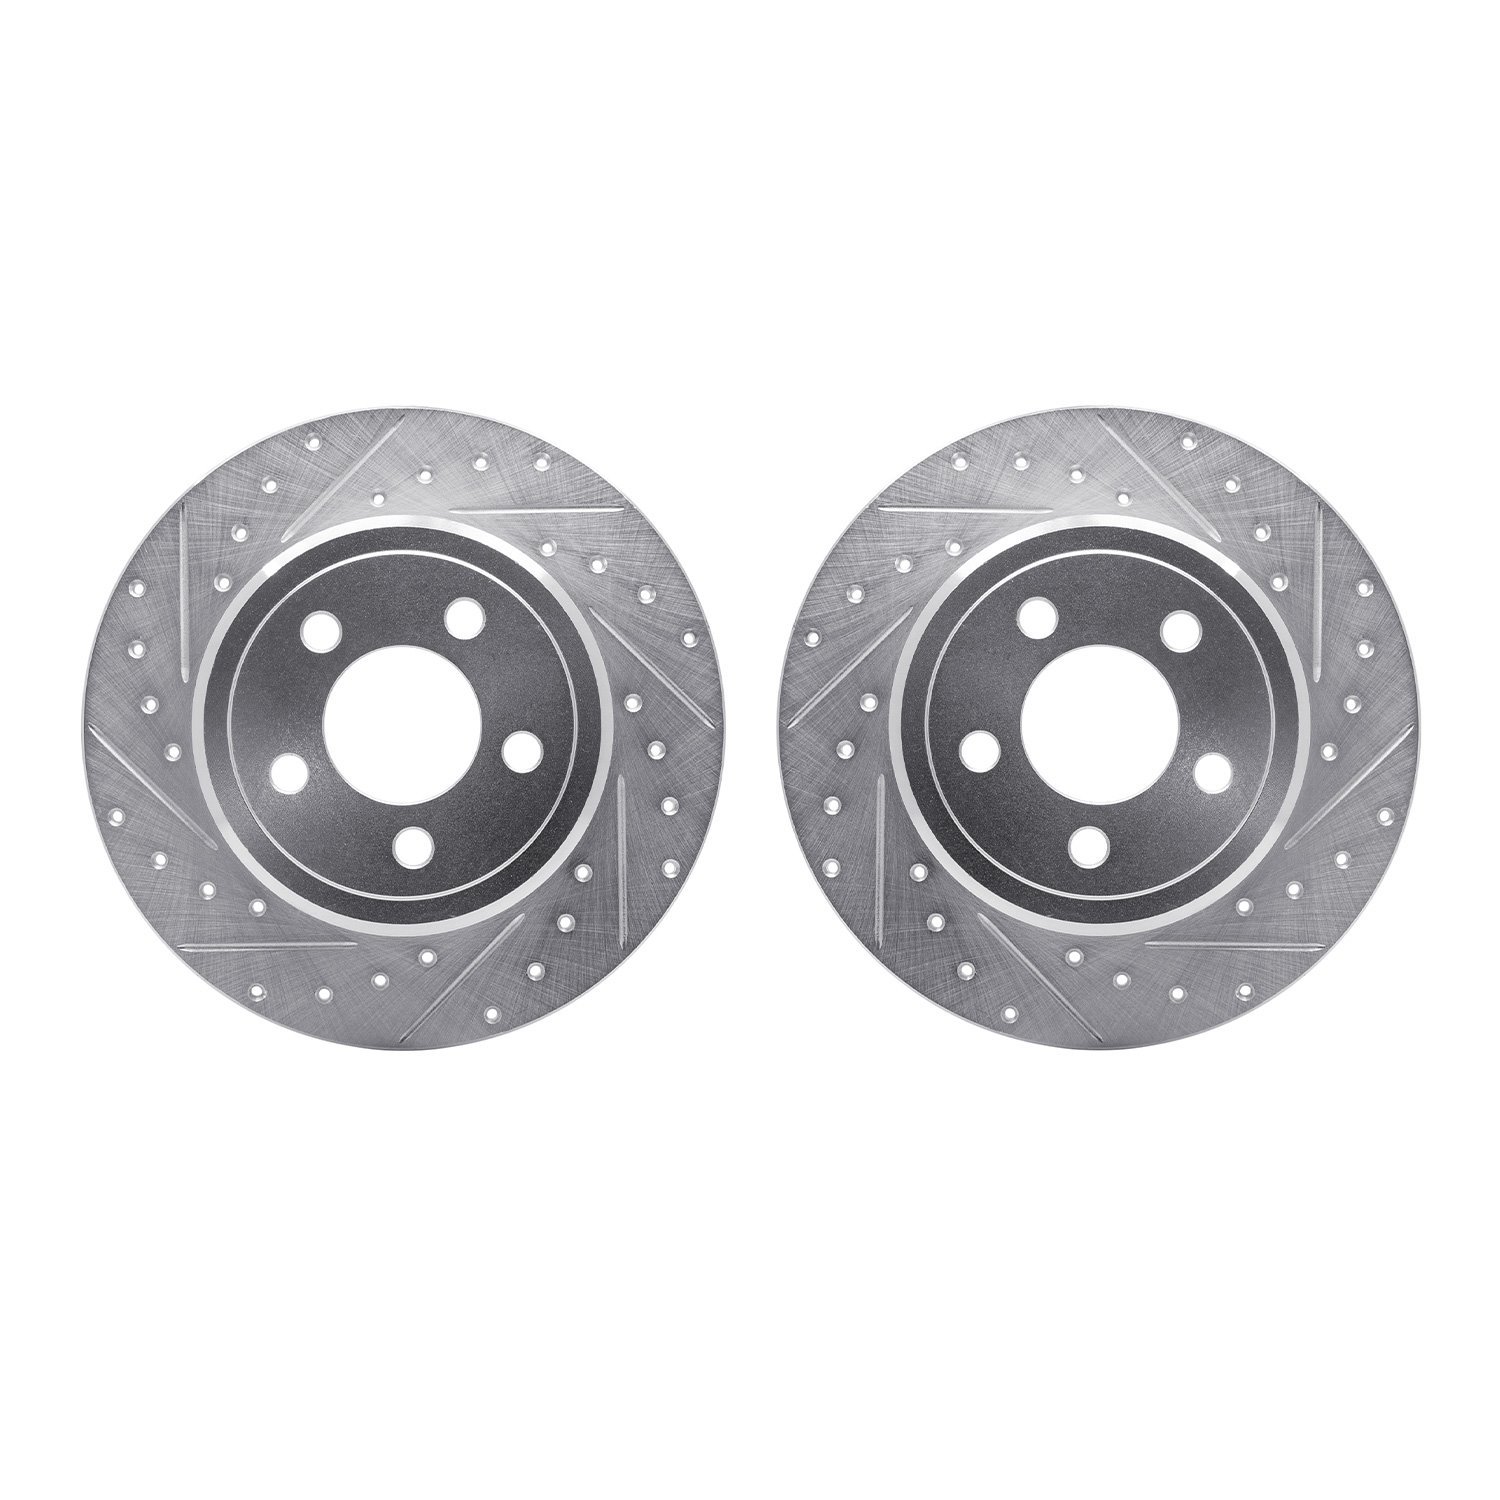 7002-39019 Drilled/Slotted Brake Rotors [Silver], Fits Select Mopar, Position: Rear